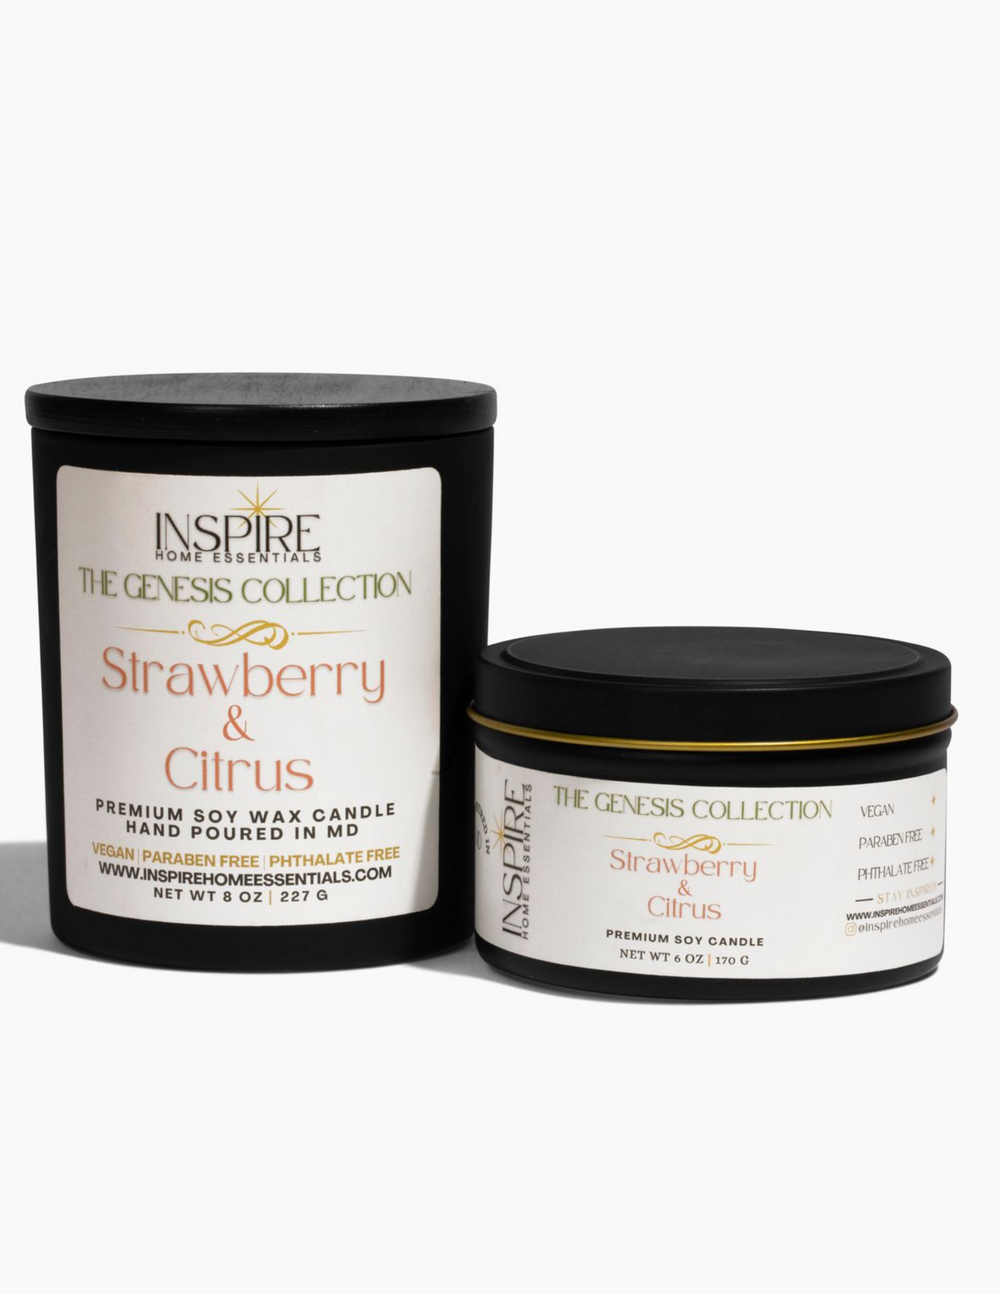 Strawberry & Citrus Candle